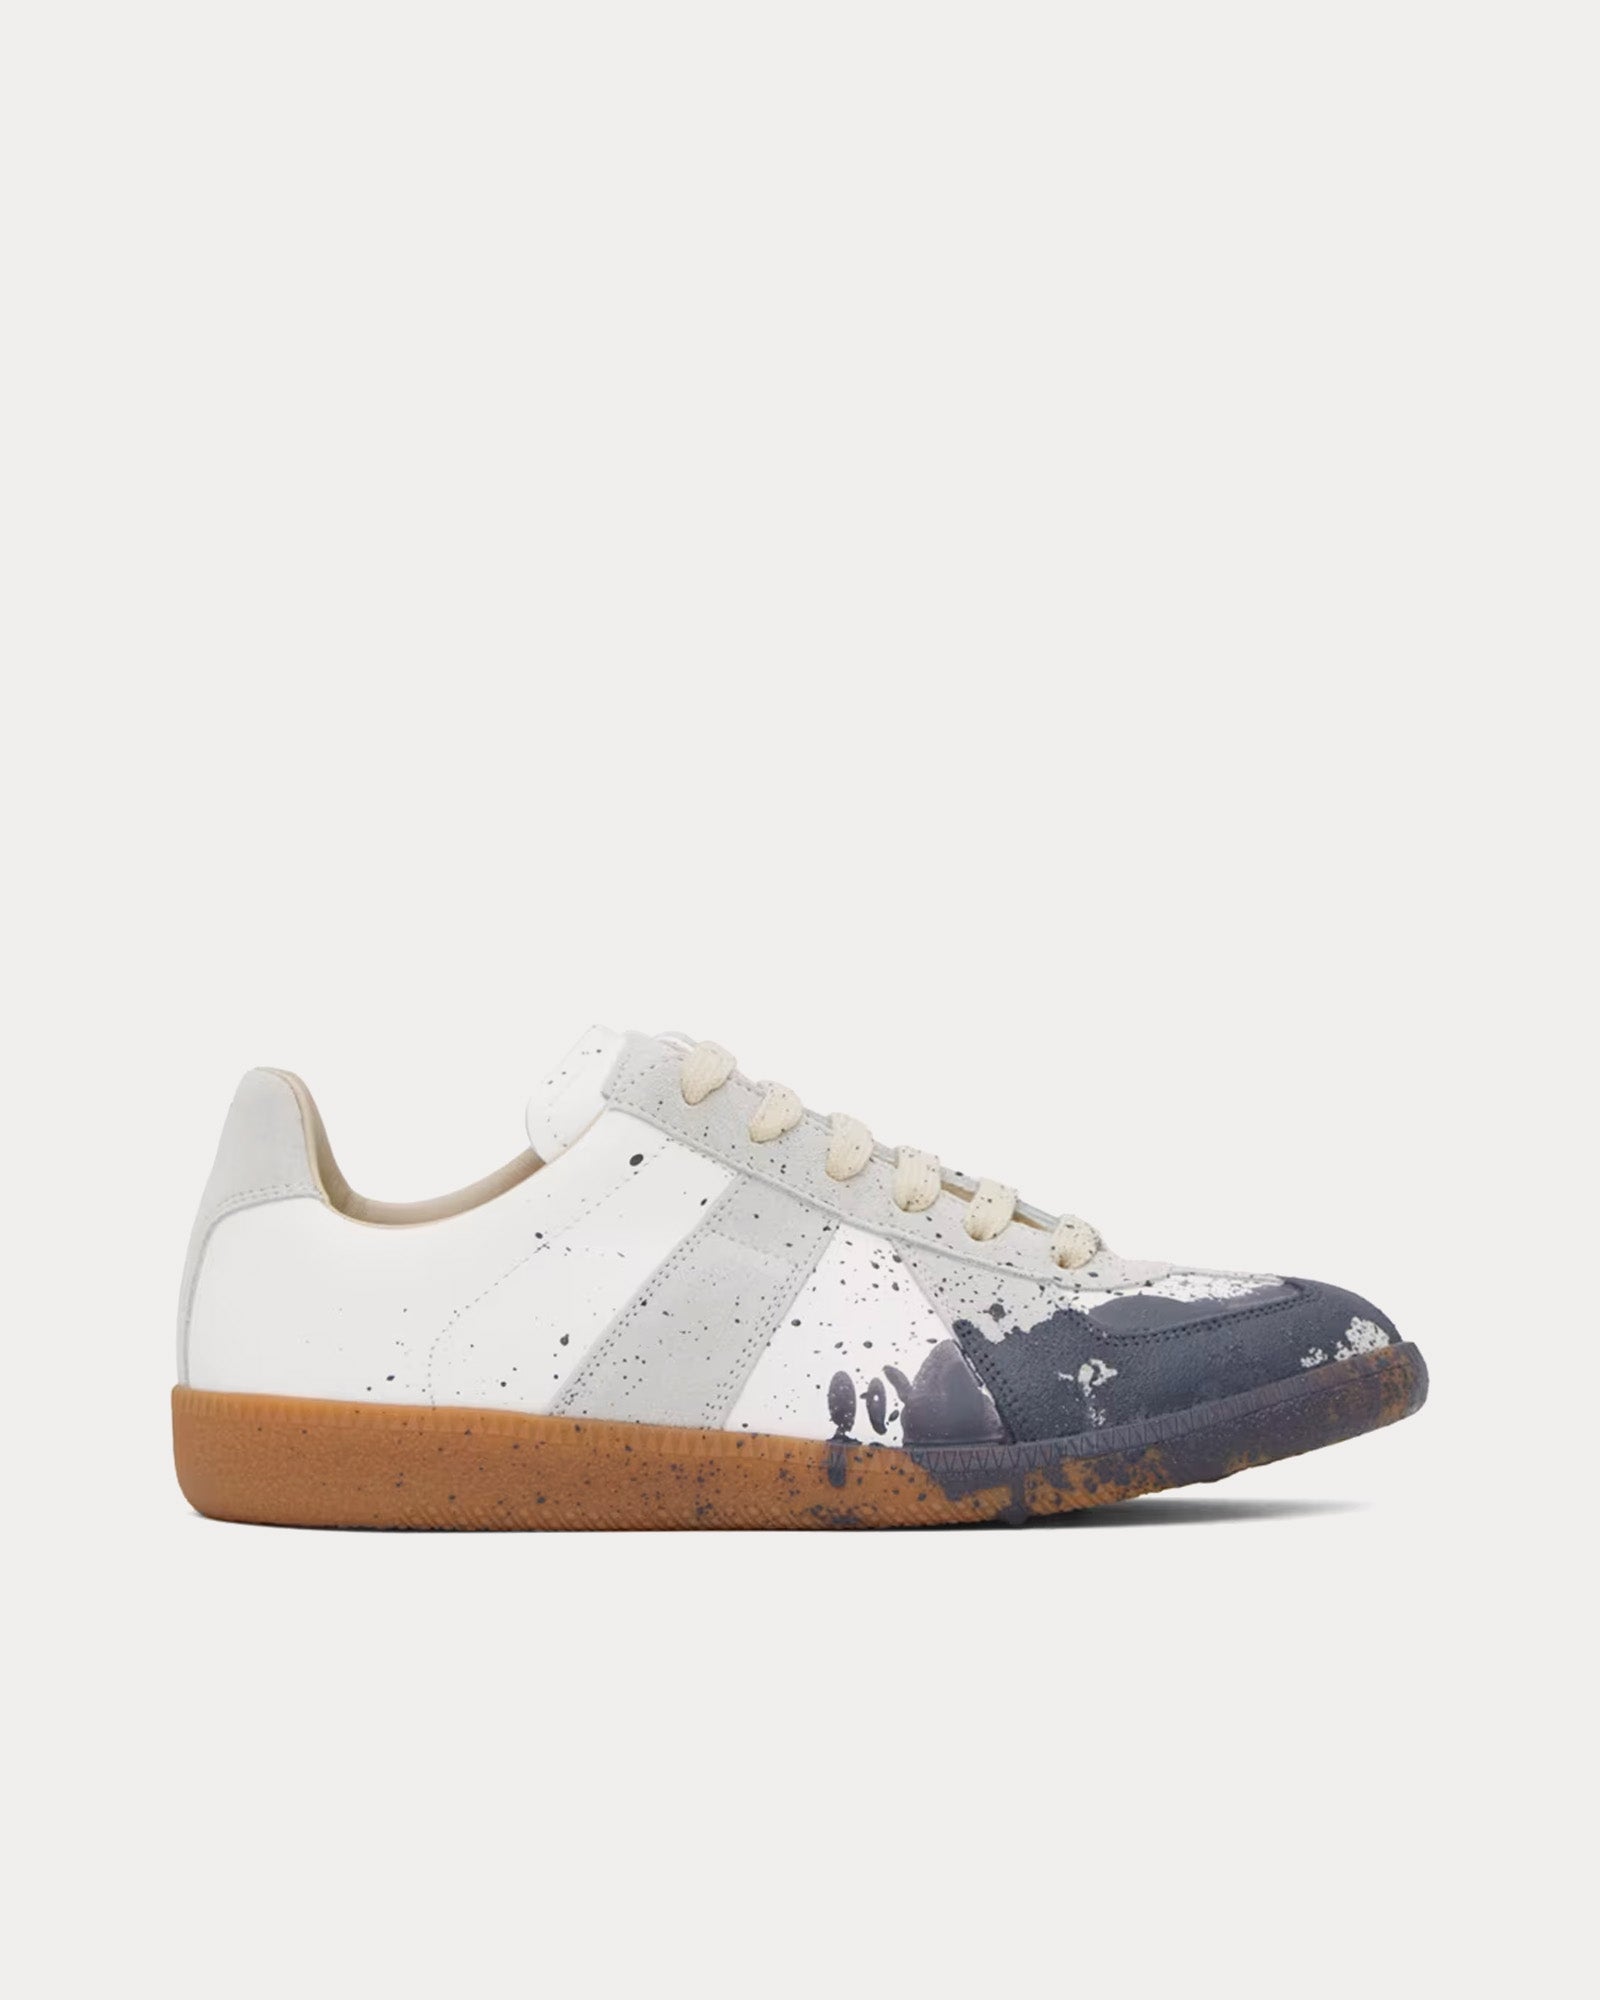 Maison Margiela - Paint Replica White / Pewter Low Top Sneakers